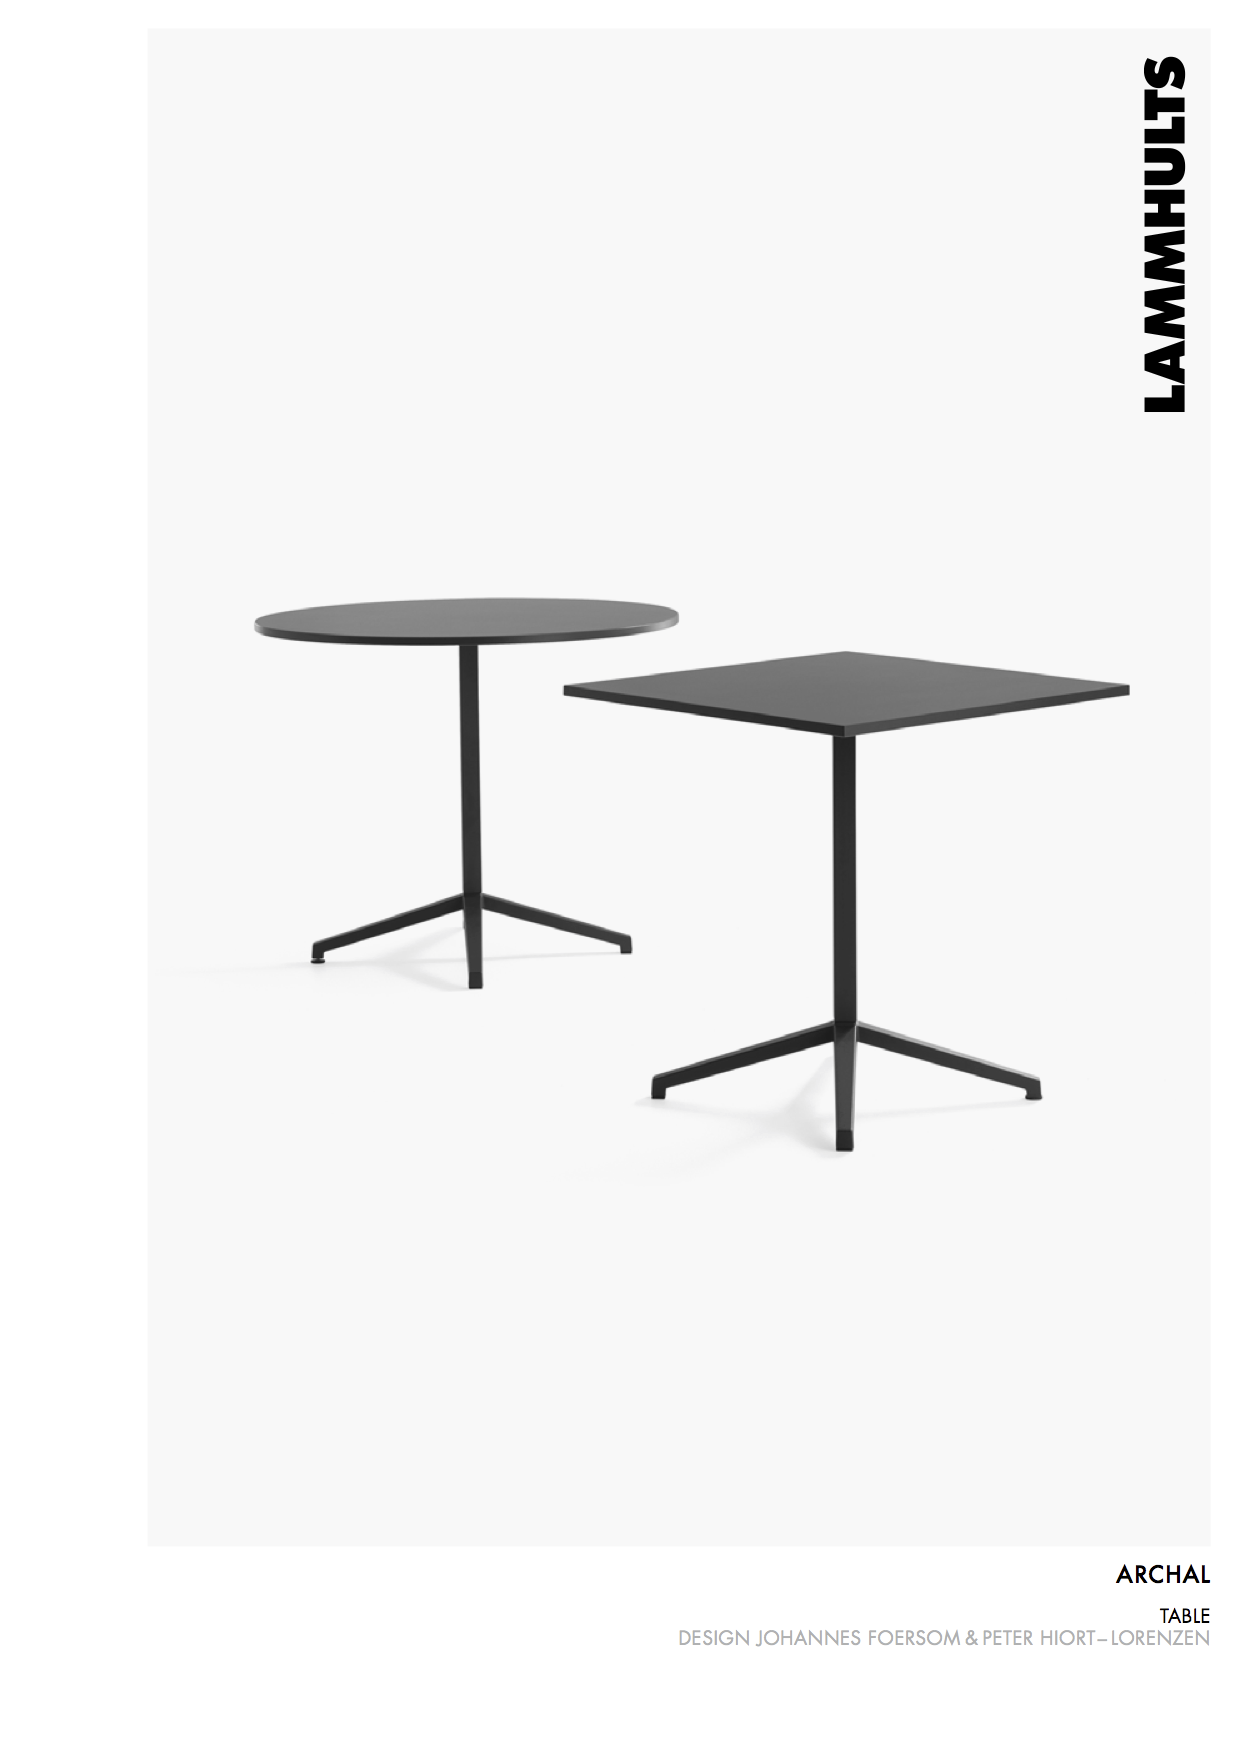 Lammhults Archal Table Brochure